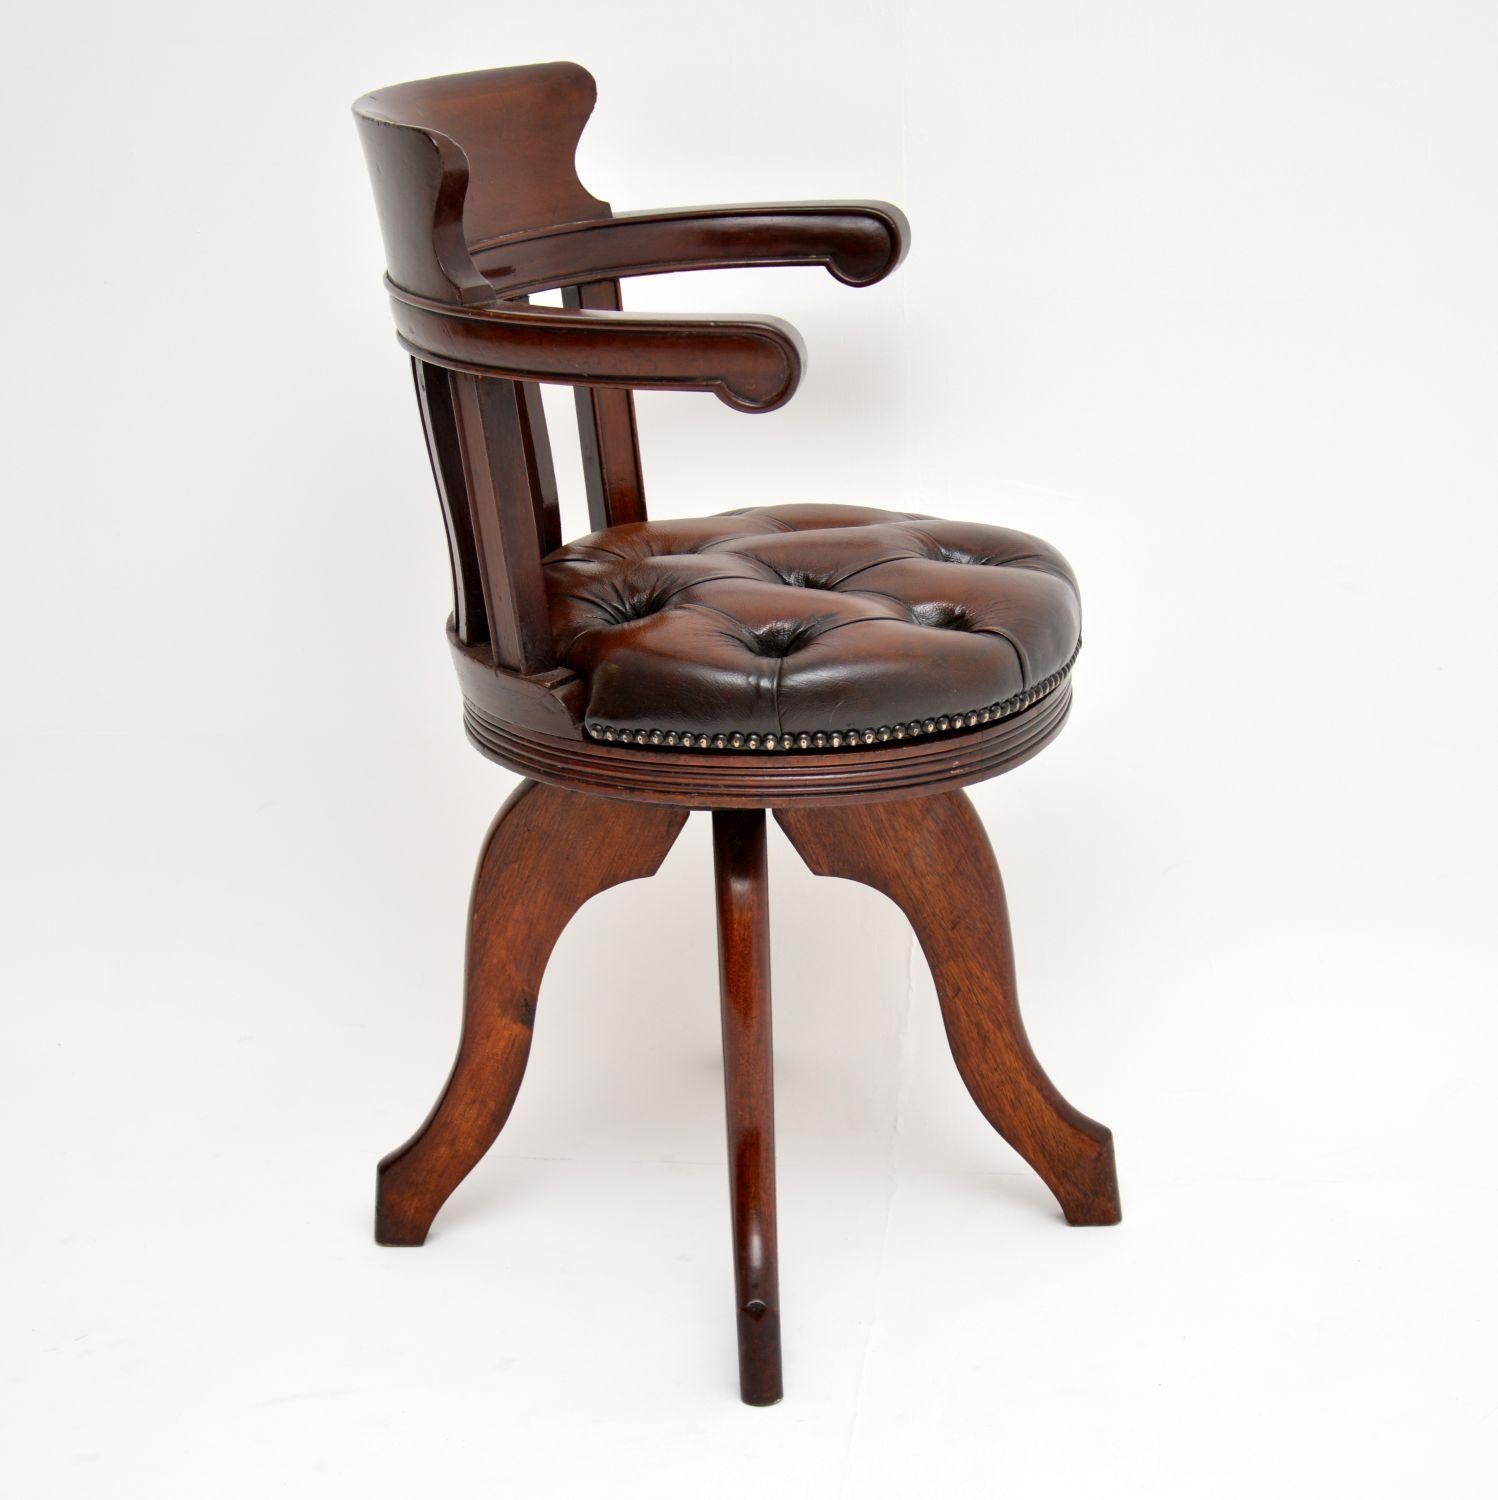 Late Victorian Antique Victorian Mahogany Leather Upholstered Swivel Desk Chair